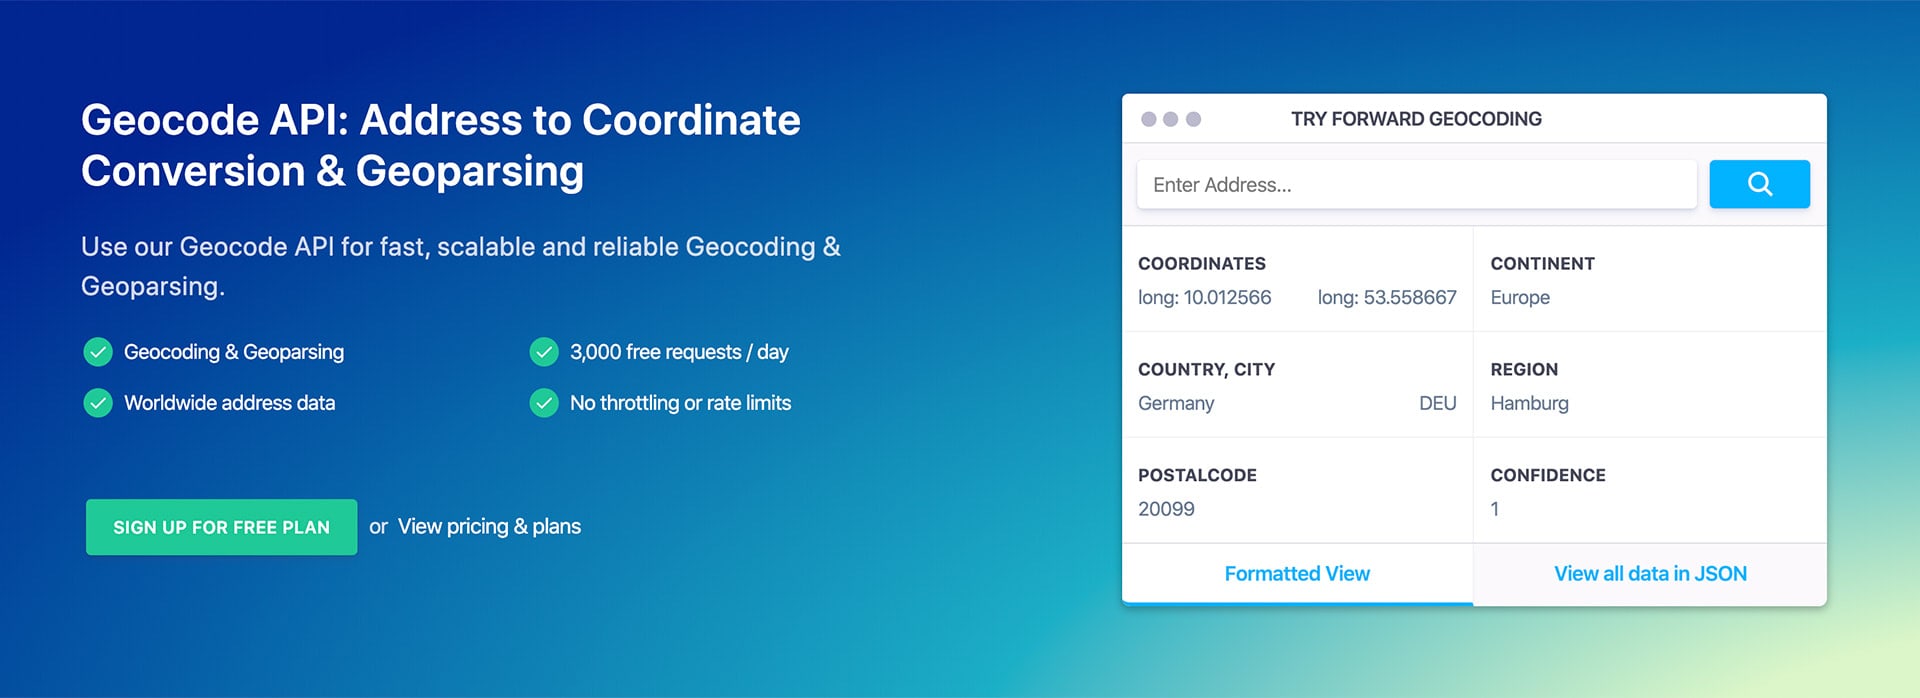 Geocode API Review: Scalable and Reliable Geocoding & Geoparsing